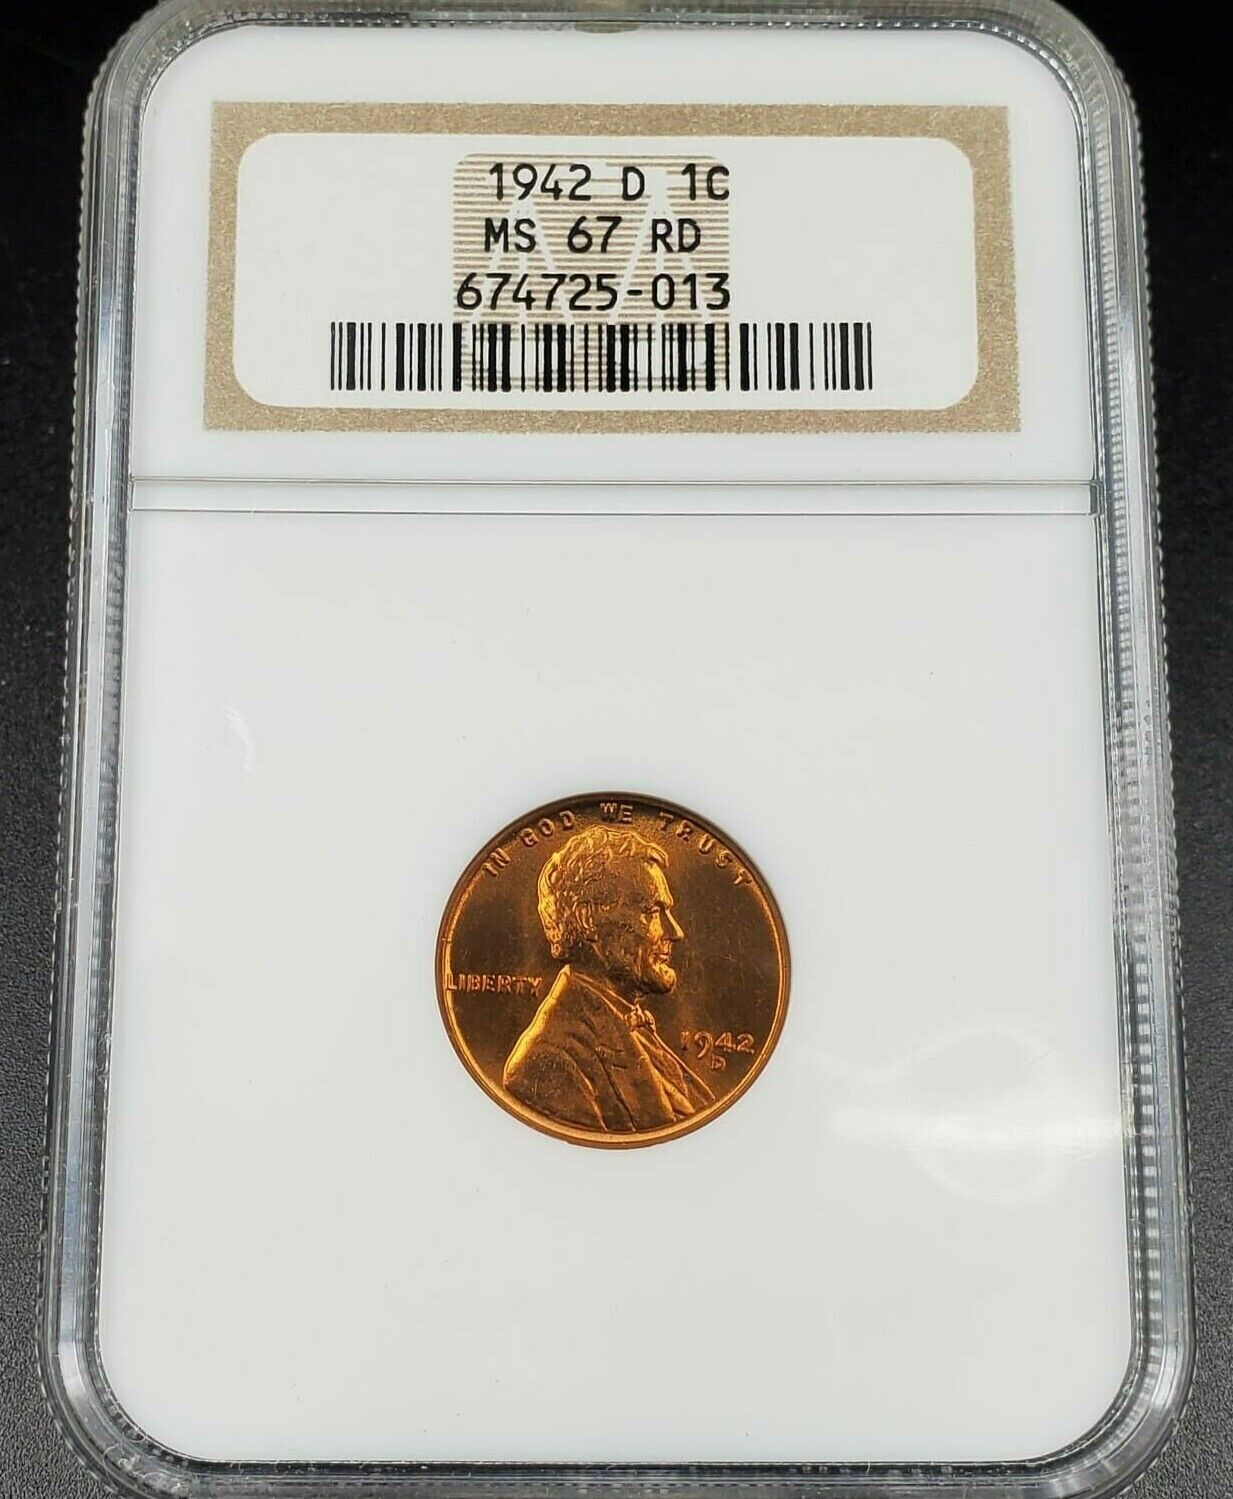 1942 D Lincoln Wheat Cent Penny Coin NGC MS67 RD GEM BU DENVER CERTIFIED PRE WW2